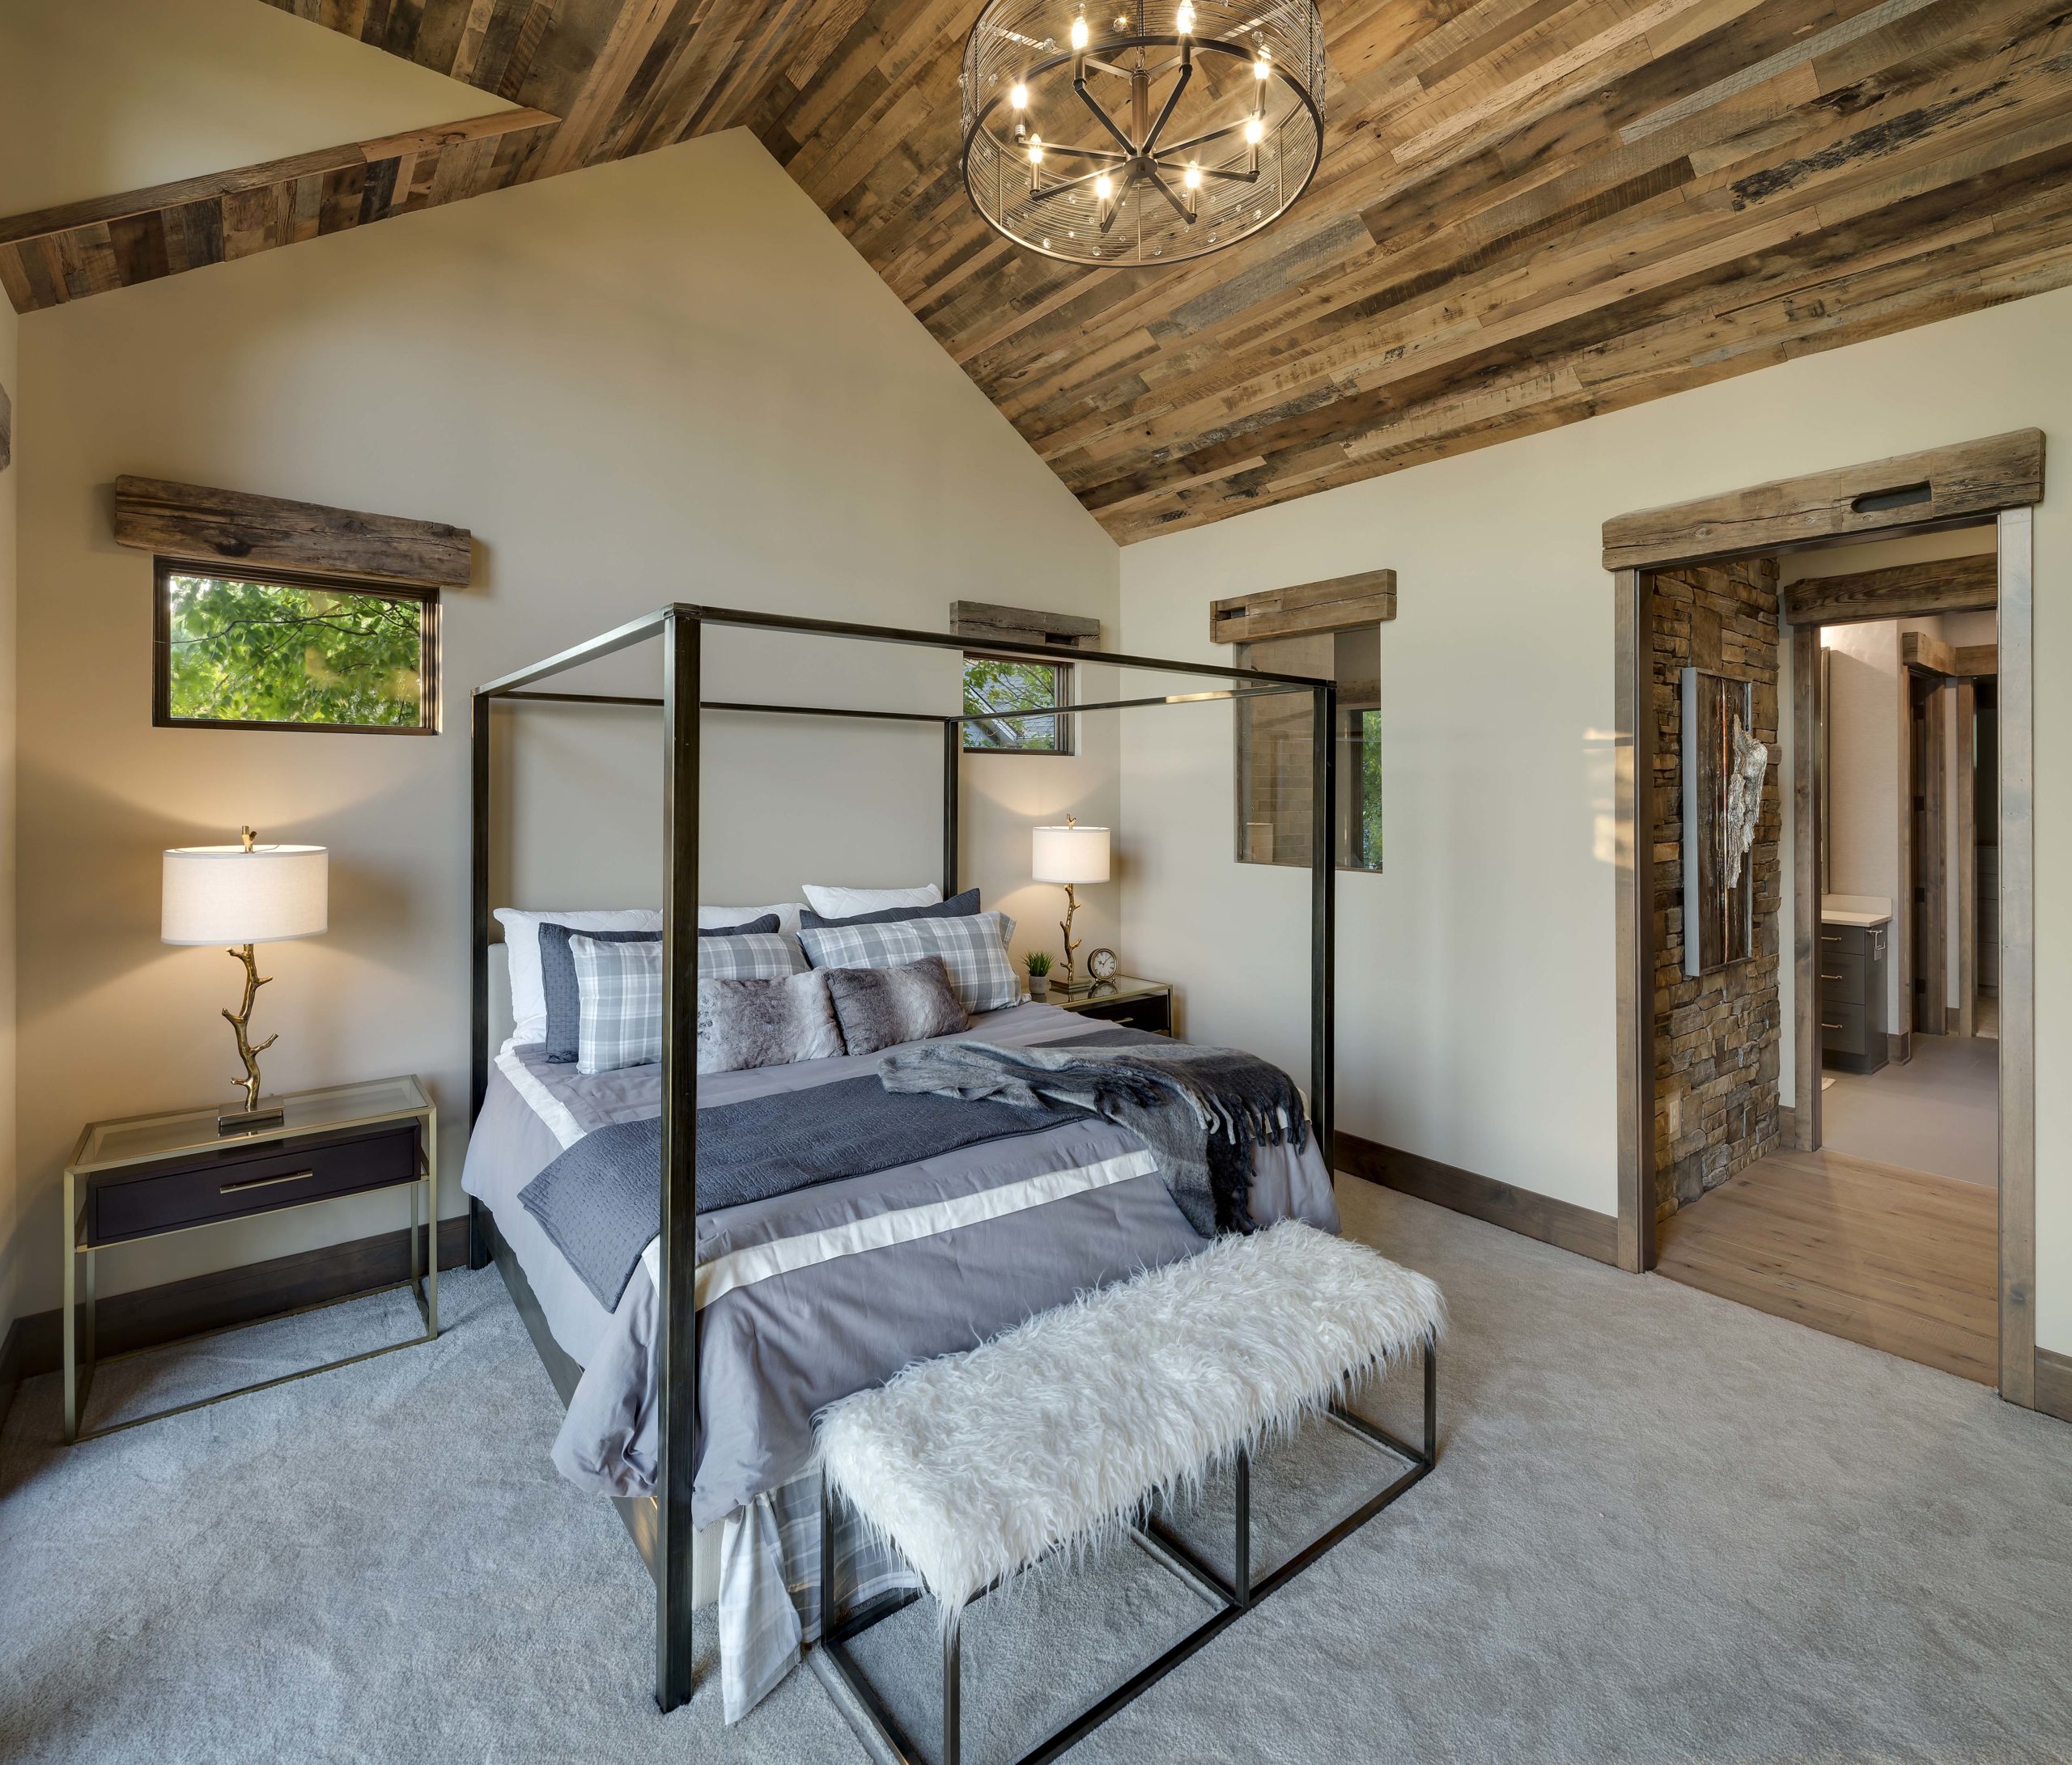 Master bedroom with canopy bed and reclaimed wood ceiling